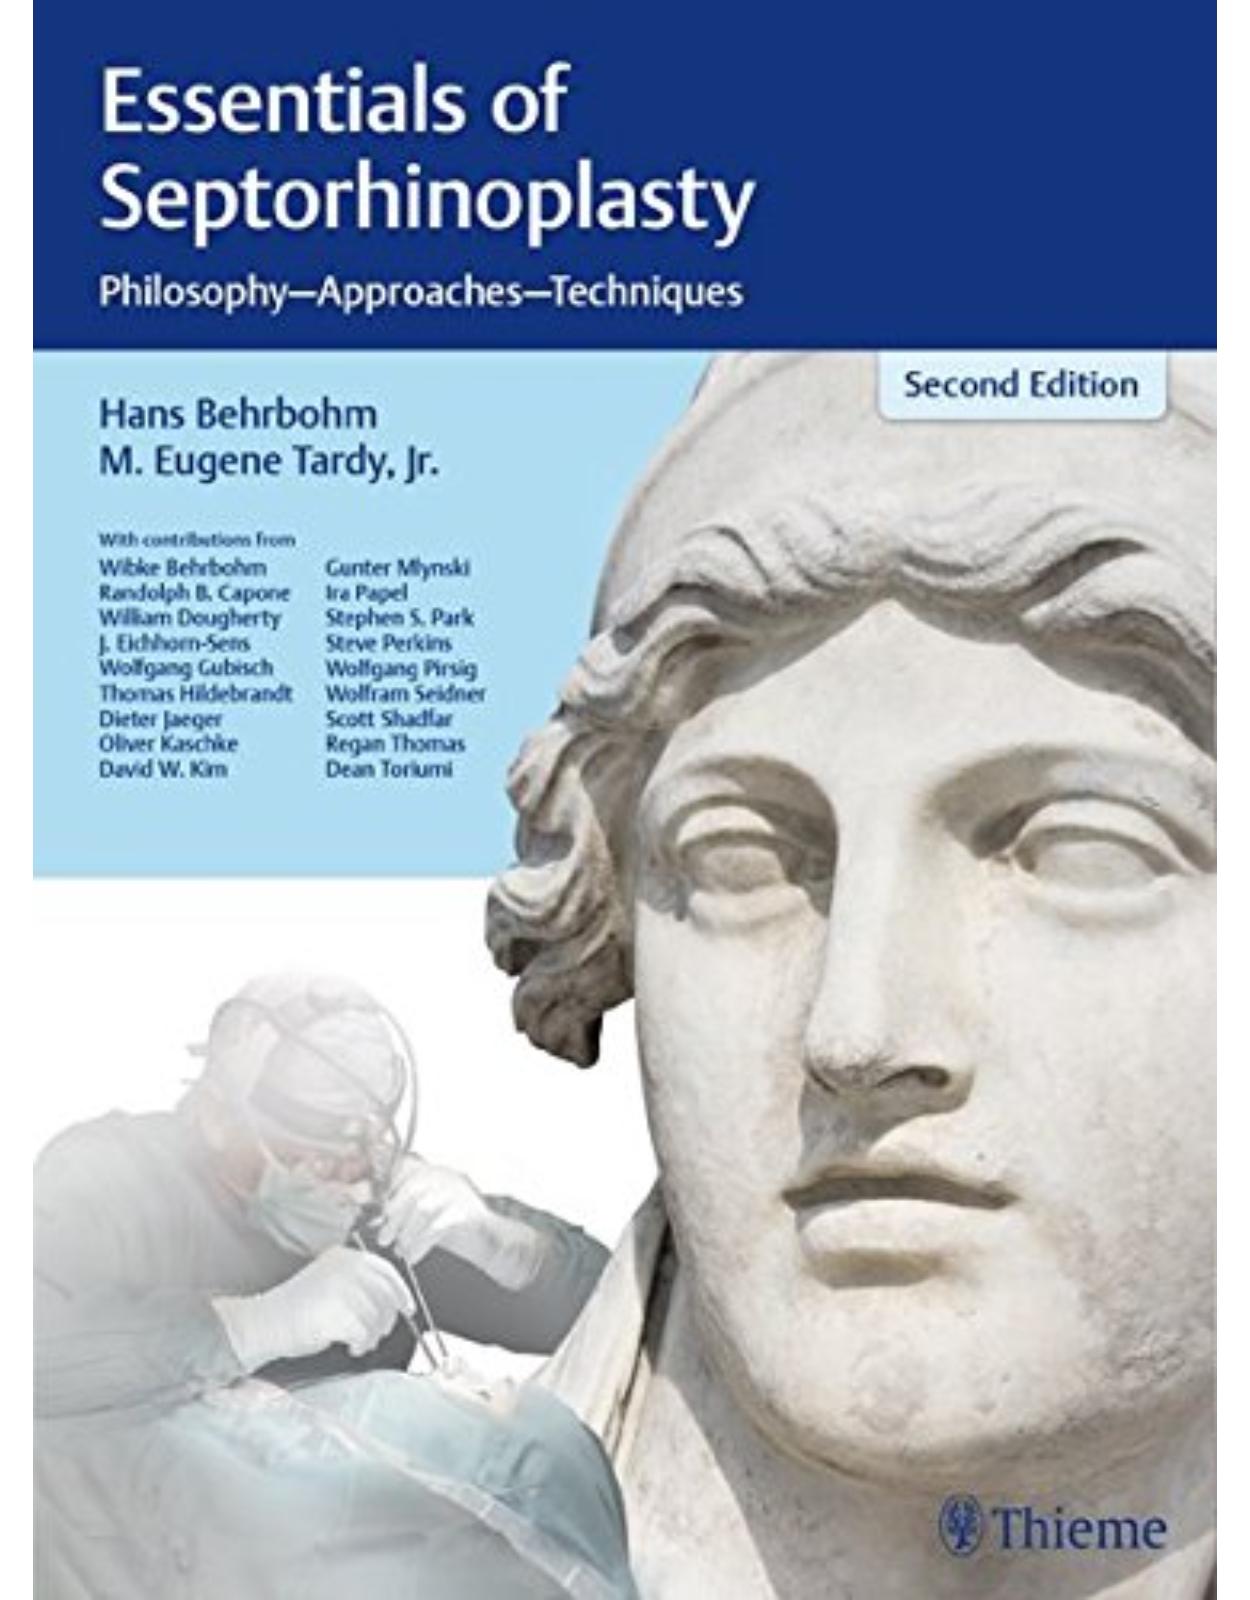 Essentials of Septorhinoplasty: Philosophy, Approaches, Techniques